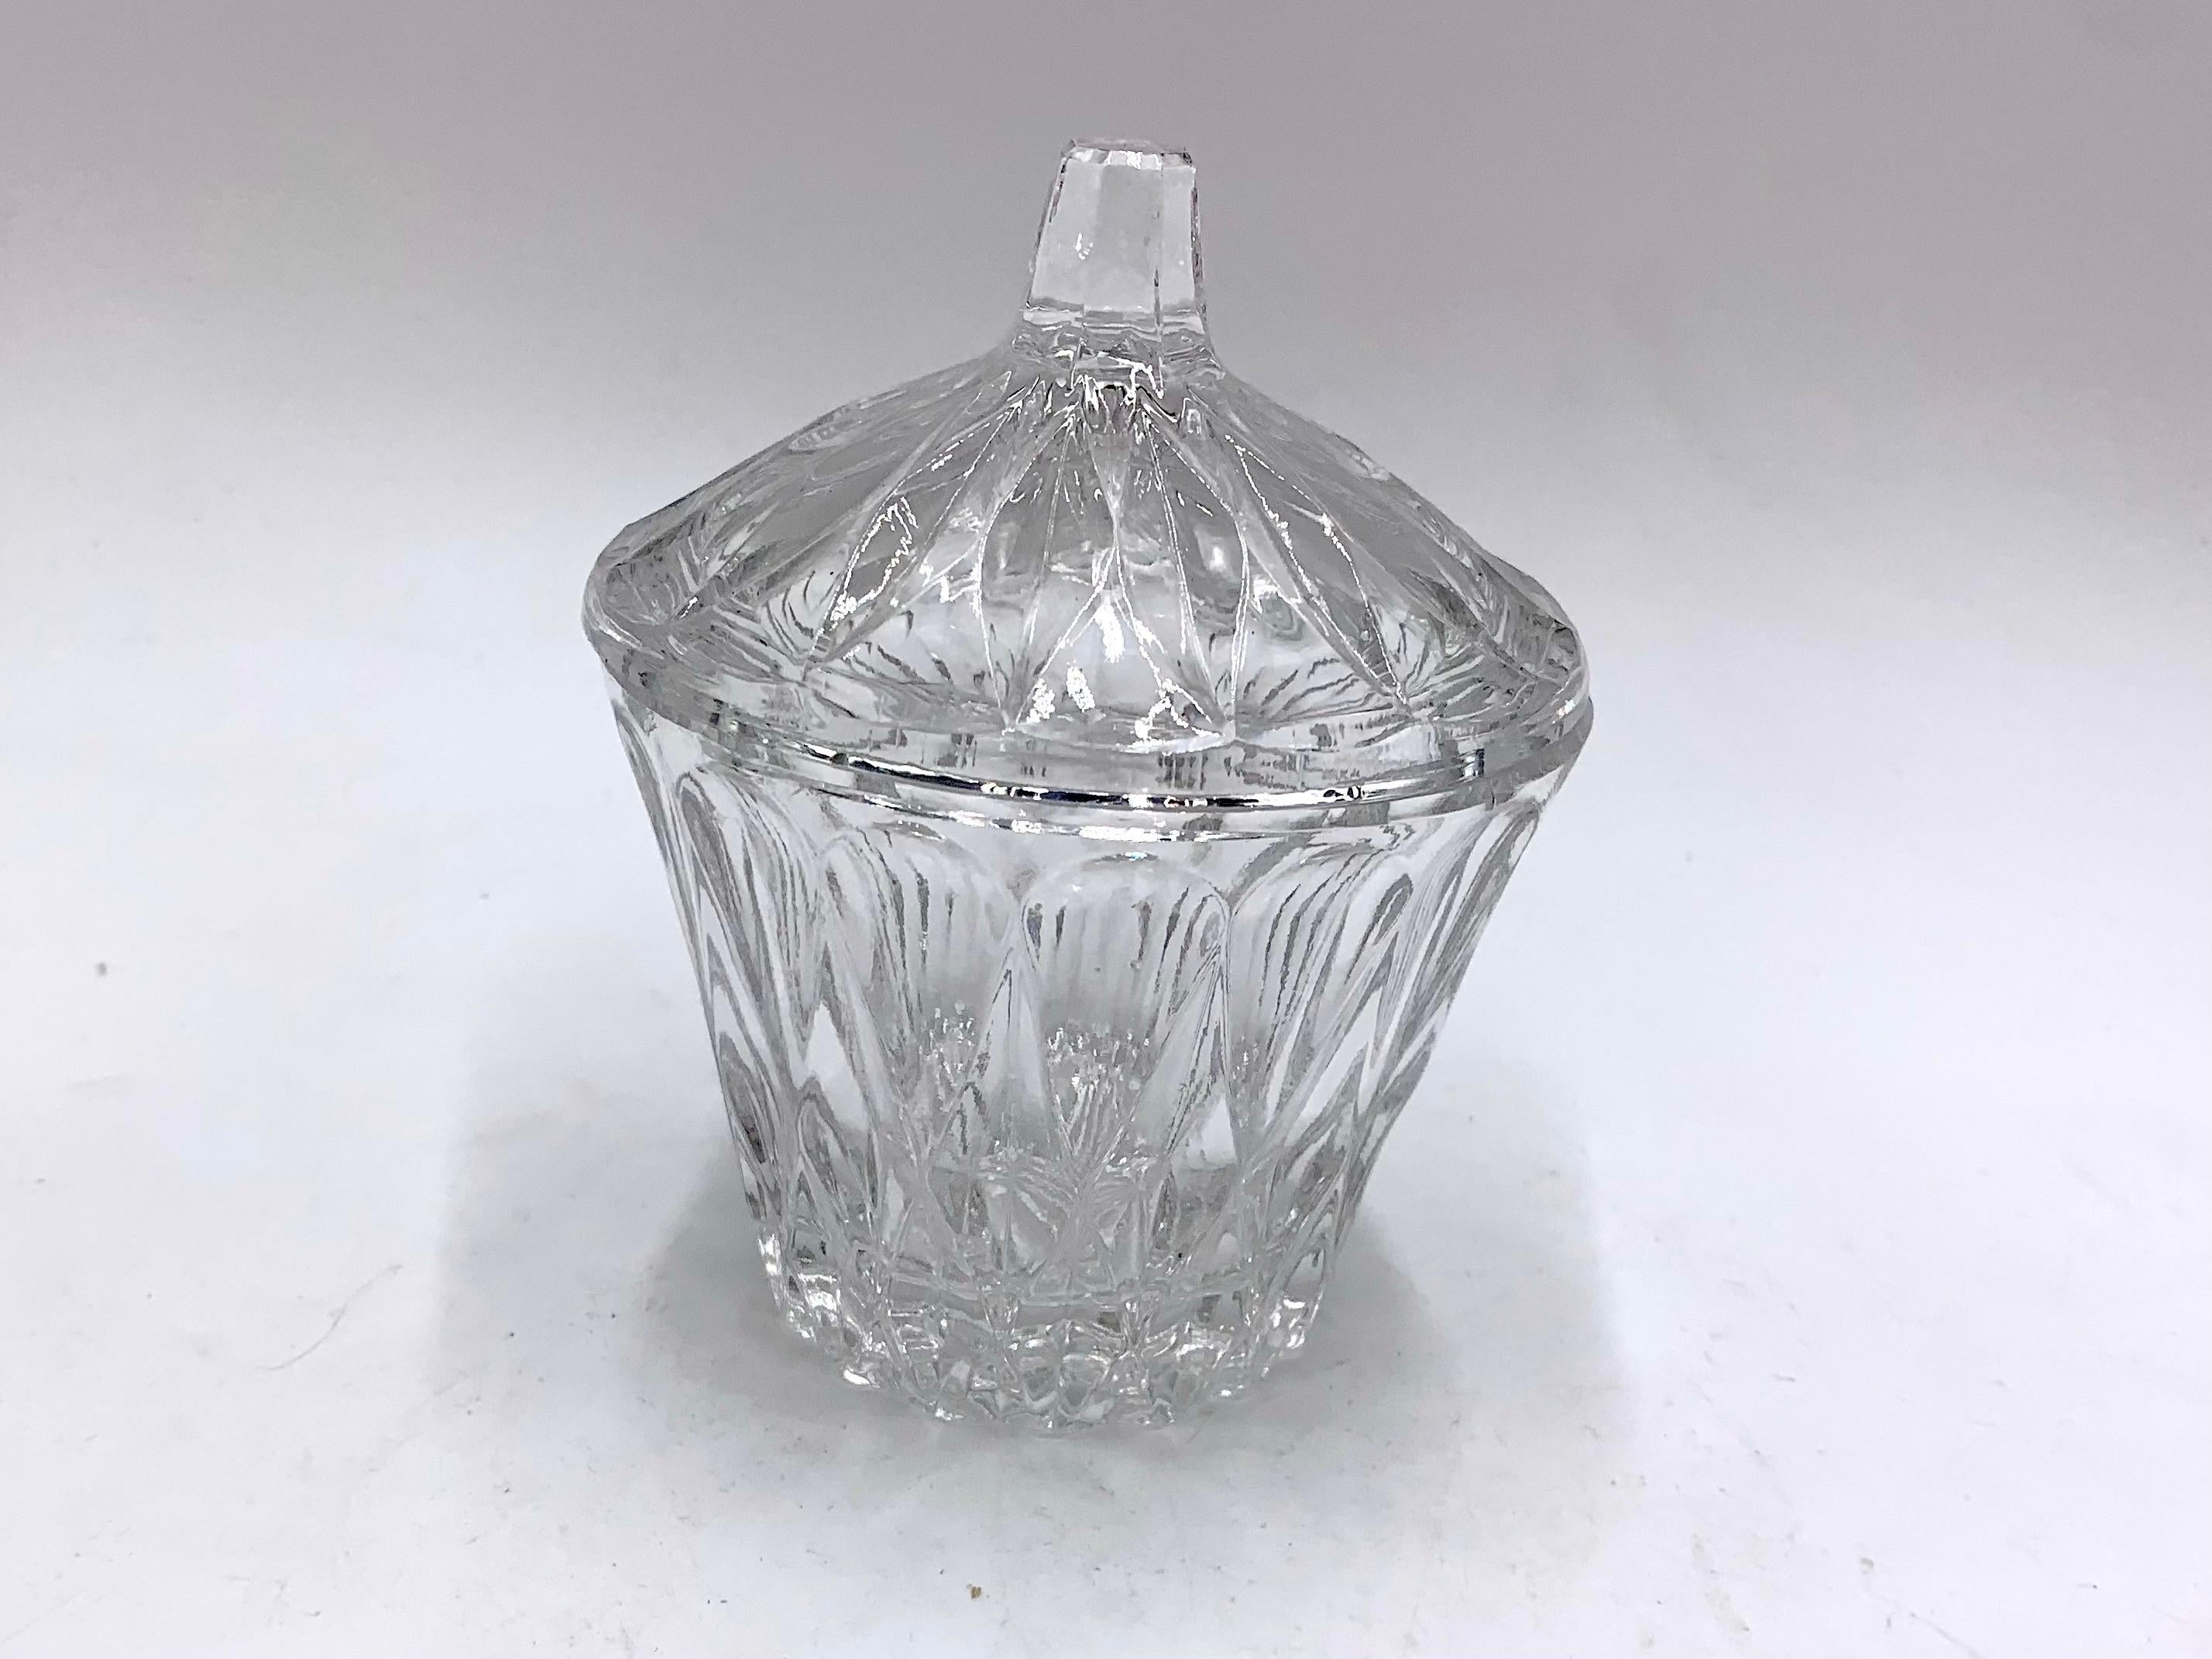 Glass casket, Poland, 1950s.
Produced in Poland in 1950s. 
Very good condition 
Measures: Height 12cm diameter 10cm.